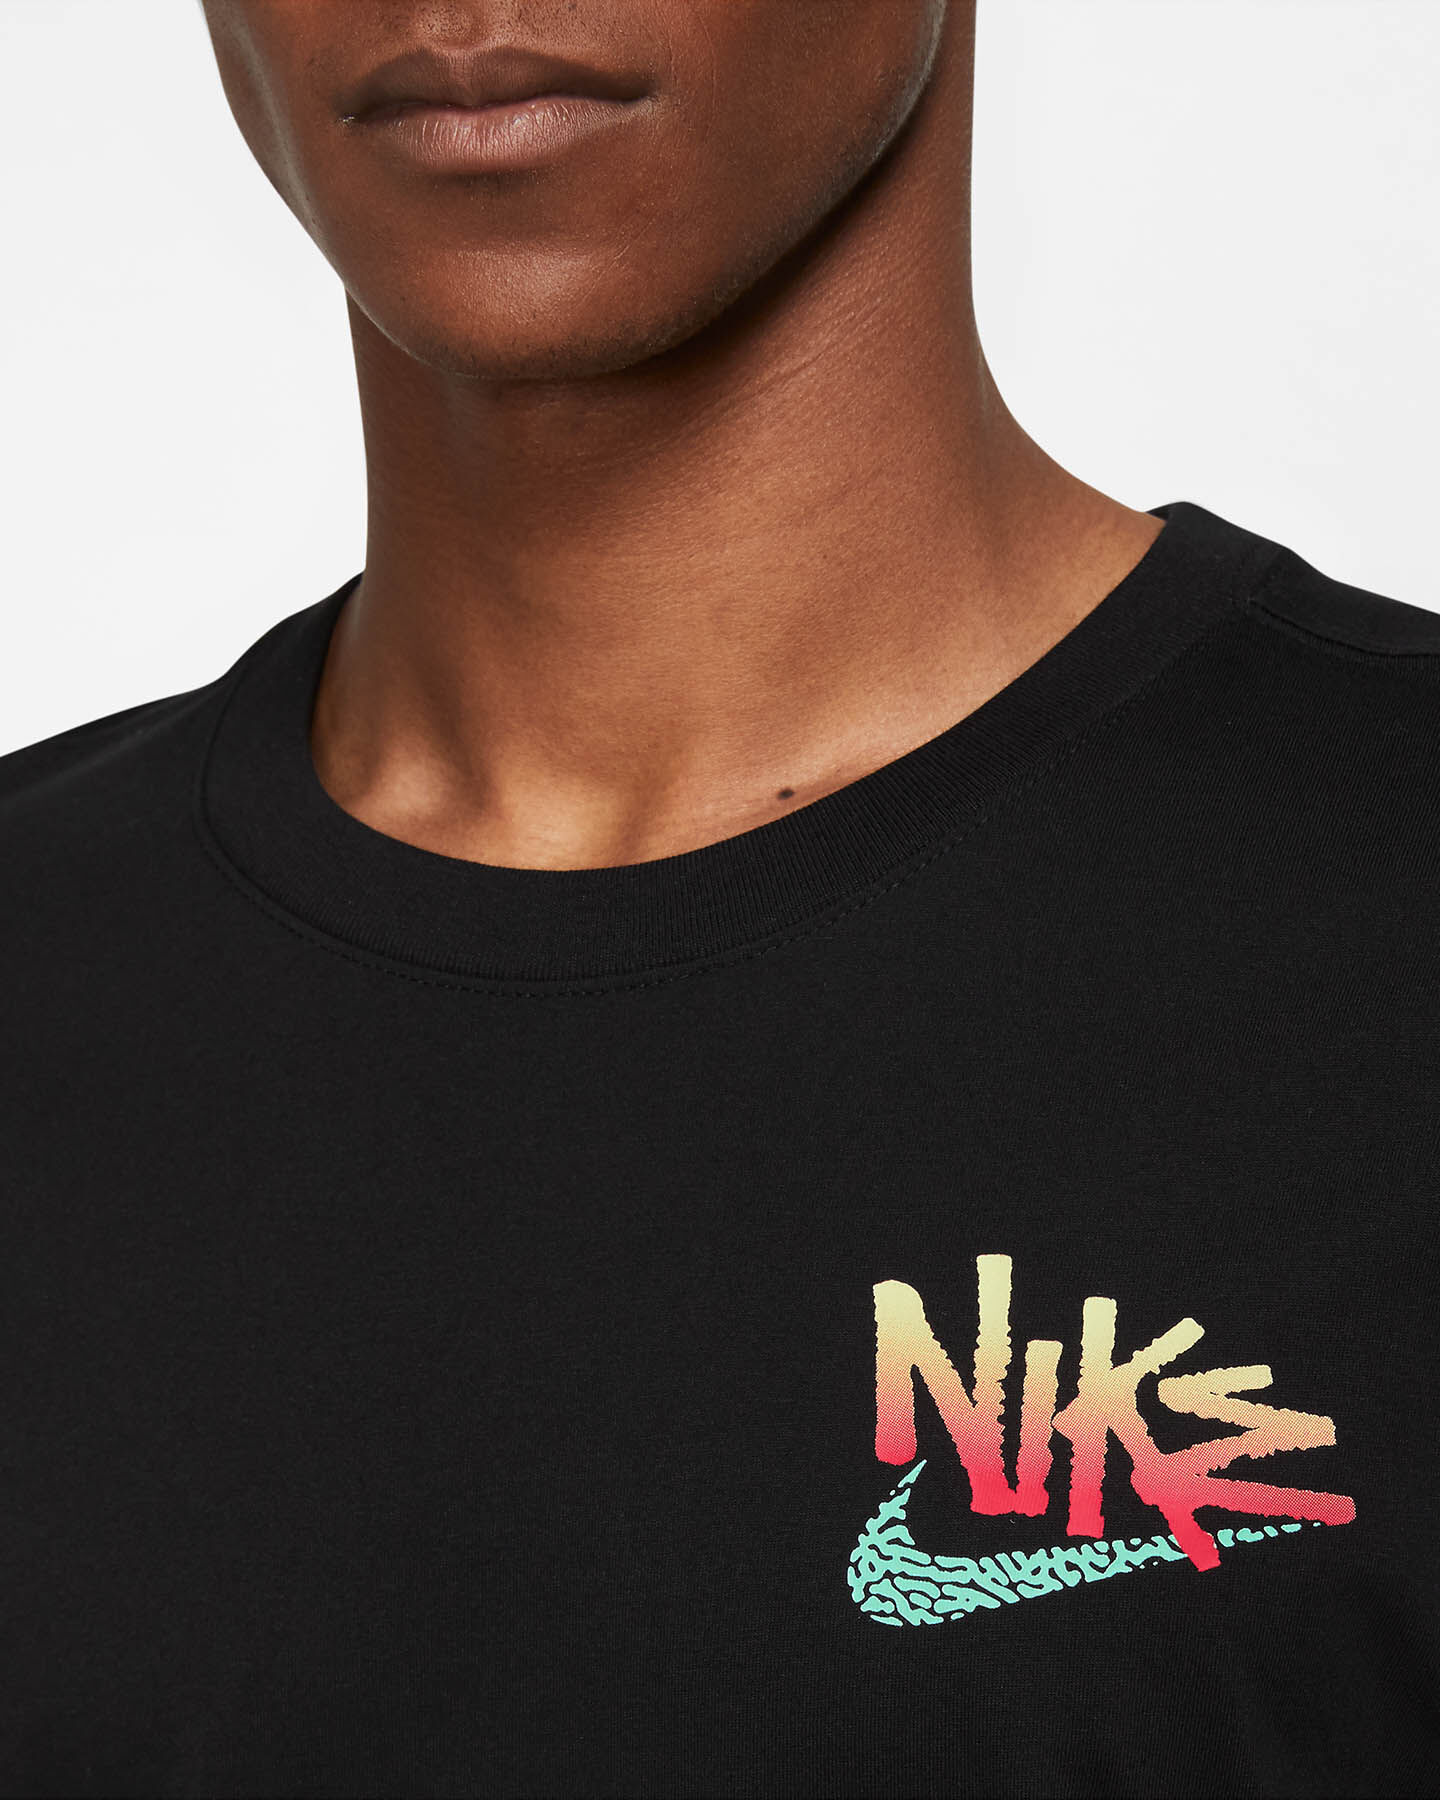  T-Shirt NIKE FESTIVAL TURTLE M S5437164|010|XS scatto 2